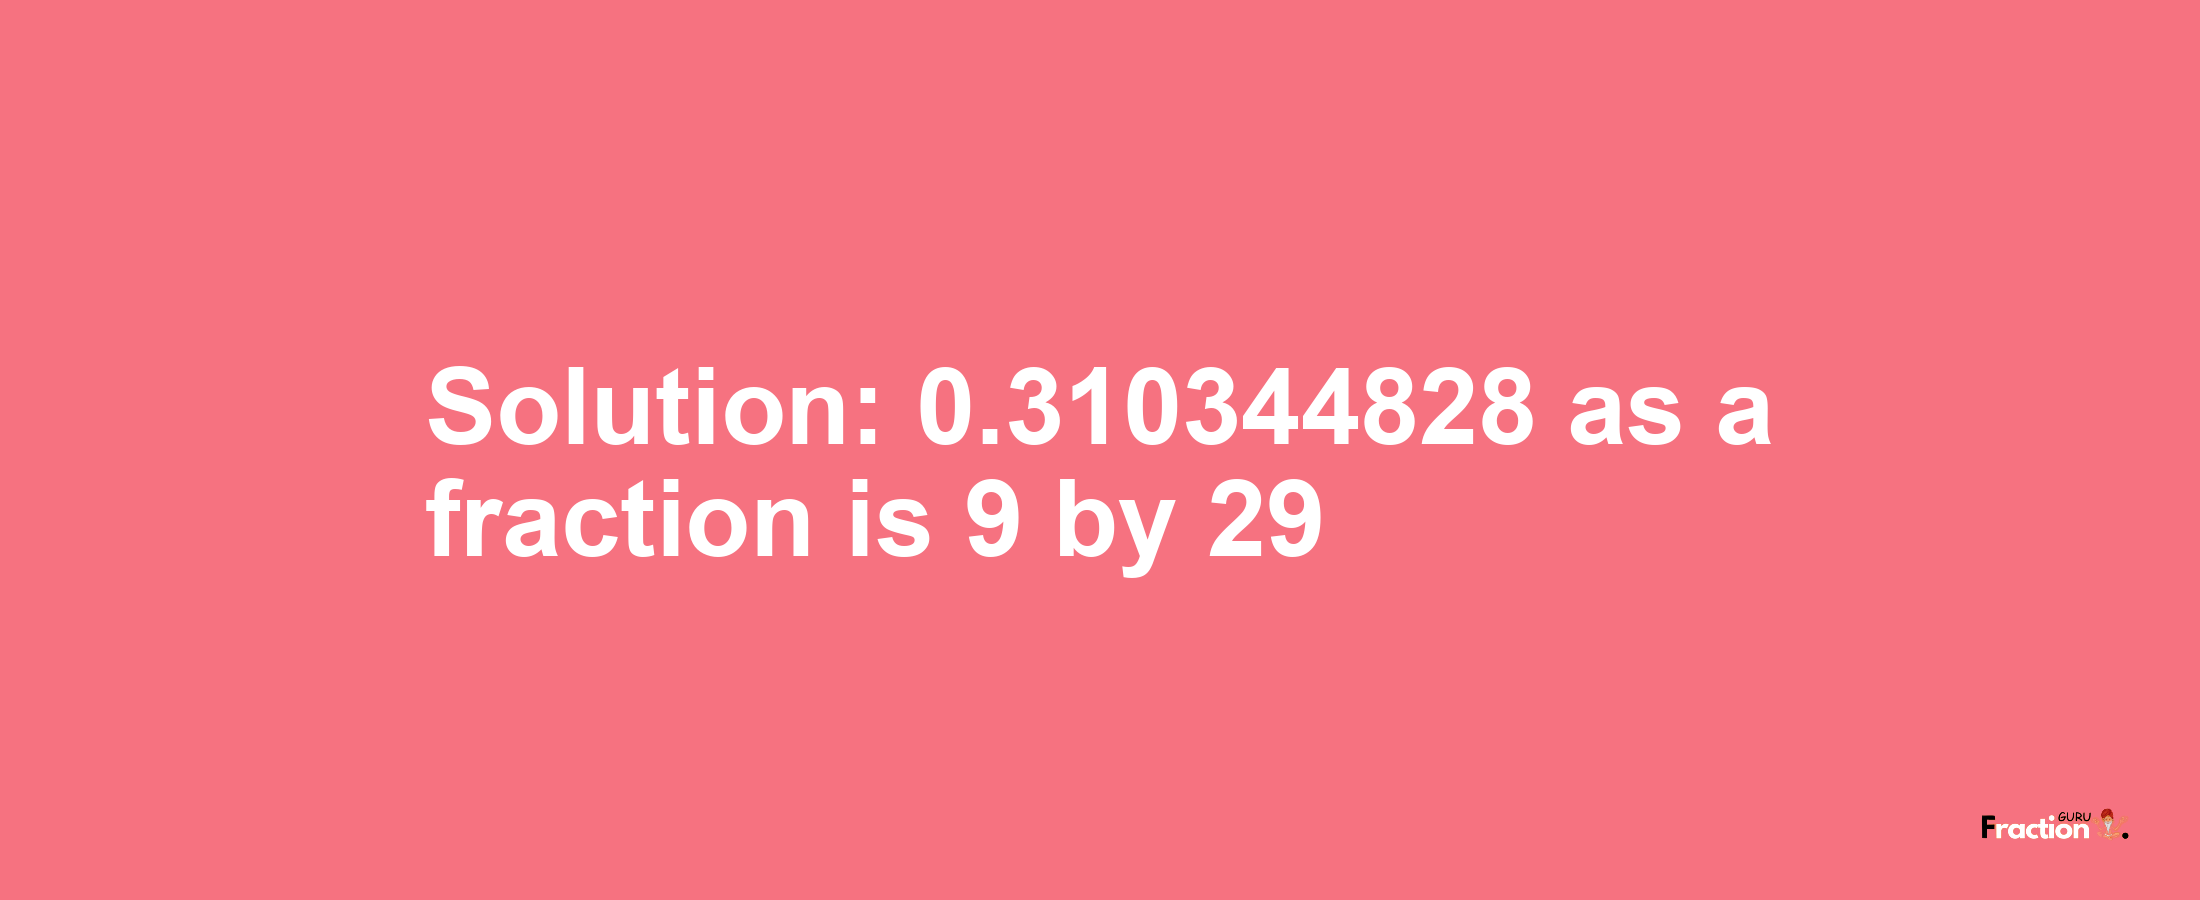 Solution:0.310344828 as a fraction is 9/29